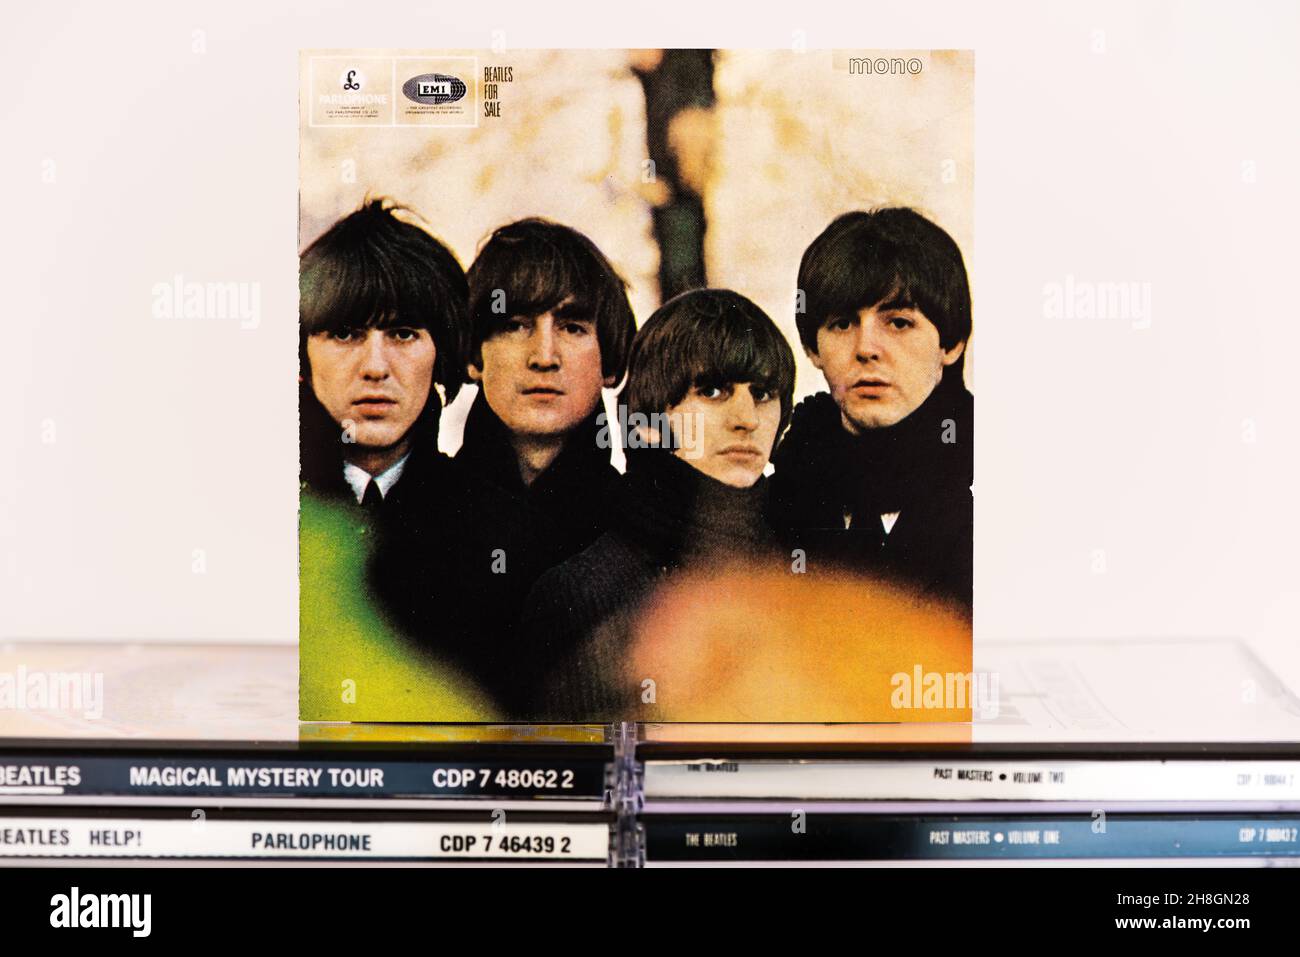 EMI CD  Inlay - Beatles for Sale. Stock Photo